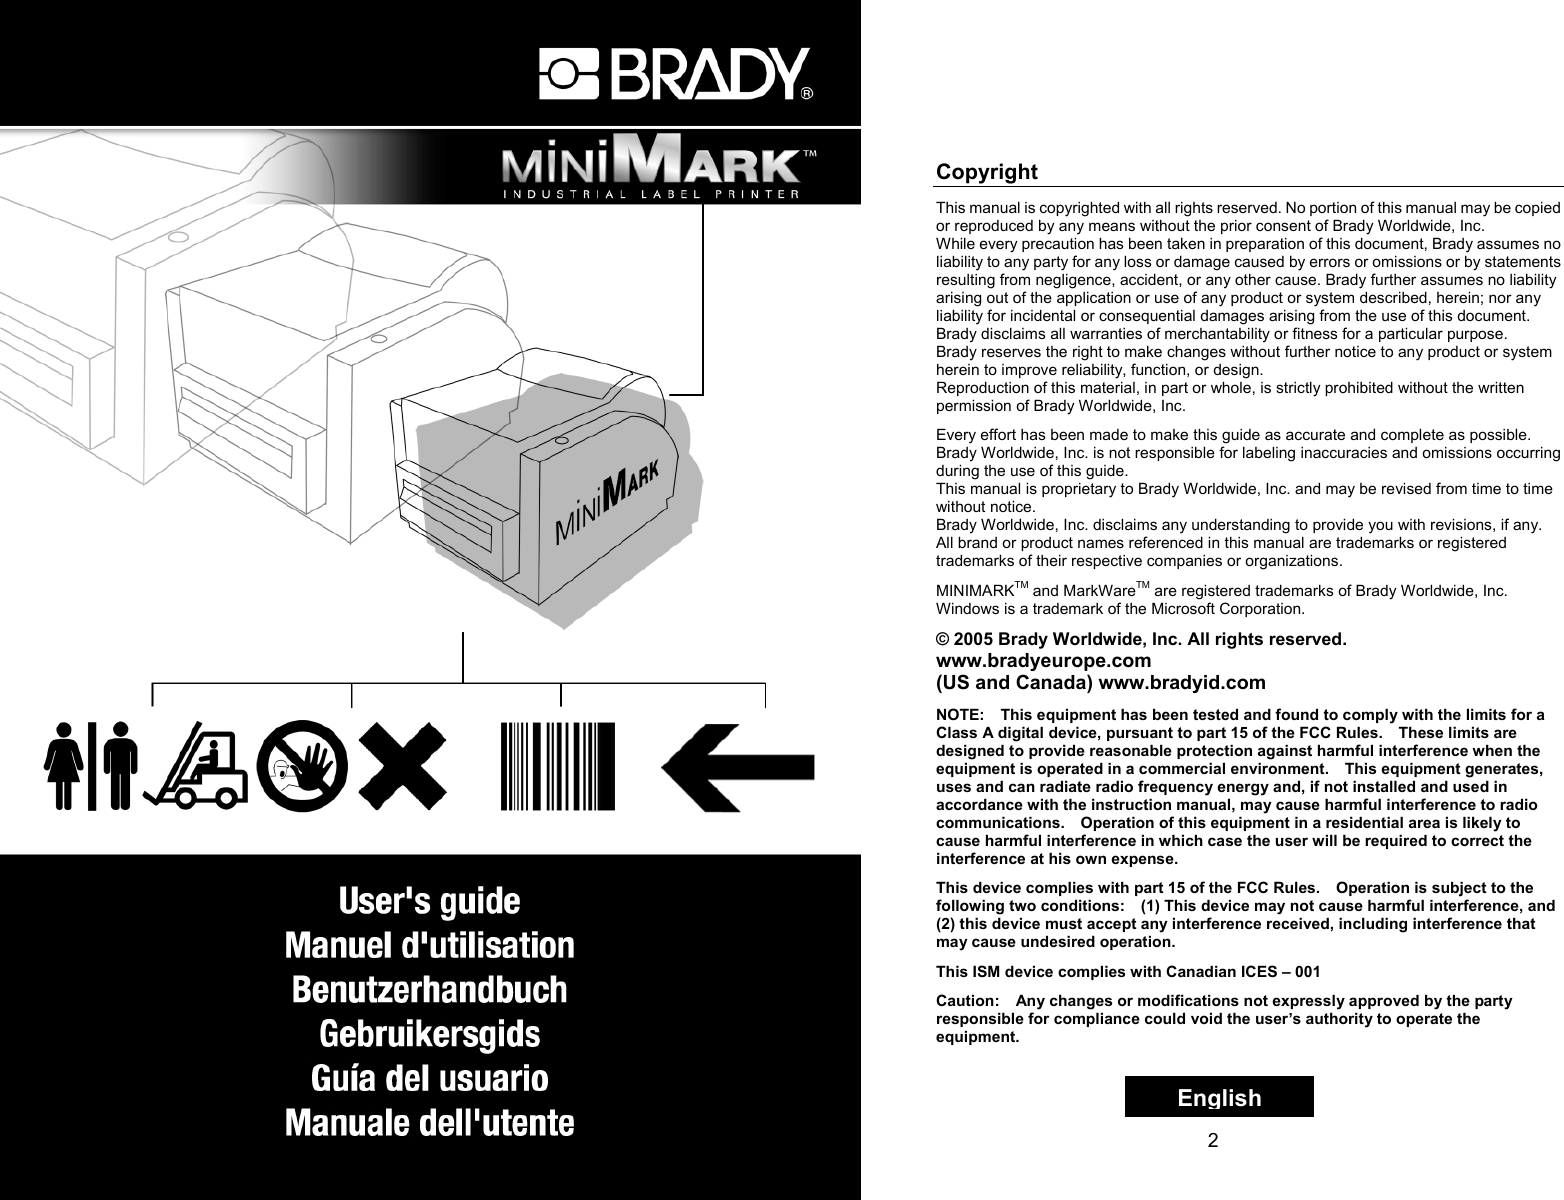 1   2 Copyright This manual is copyrighted with all rights reserved. No portion of this manual may be copied or reproduced by any means without the prior consent of Brady Worldwide, Inc.   While every precaution has been taken in preparation of this document, Brady assumes no liability to any party for any loss or damage caused by errors or omissions or by statements resulting from negligence, accident, or any other cause. Brady further assumes no liability arising out of the application or use of any product or system described, herein; nor any liability for incidental or consequential damages arising from the use of this document. Brady disclaims all warranties of merchantability or fitness for a particular purpose. Brady reserves the right to make changes without further notice to any product or system herein to improve reliability, function, or design. Reproduction of this material, in part or whole, is strictly prohibited without the written permission of Brady Worldwide, Inc.  Every effort has been made to make this guide as accurate and complete as possible. Brady Worldwide, Inc. is not responsible for labeling inaccuracies and omissions occurring during the use of this guide. This manual is proprietary to Brady Worldwide, Inc. and may be revised from time to time without notice. Brady Worldwide, Inc. disclaims any understanding to provide you with revisions, if any. All brand or product names referenced in this manual are trademarks or registered trademarks of their respective companies or organizations.  MINIMARKTM and MarkWareTM are registered trademarks of Brady Worldwide, Inc. Windows is a trademark of the Microsoft Corporation.  © 2005 Brady Worldwide, Inc. All rights reserved. www.bradyeurope.com (US and Canada) www.bradyid.com  NOTE:    This equipment has been tested and found to comply with the limits for a Class A digital device, pursuant to part 15 of the FCC Rules.    These limits are designed to provide reasonable protection against harmful interference when the equipment is operated in a commercial environment.    This equipment generates, uses and can radiate radio frequency energy and, if not installed and used in accordance with the instruction manual, may cause harmful interference to radio communications.    Operation of this equipment in a residential area is likely to cause harmful interference in which case the user will be required to correct the interference at his own expense.  This device complies with part 15 of the FCC Rules.    Operation is subject to the following two conditions:    (1) This device may not cause harmful interference, and (2) this device must accept any interference received, including interference that may cause undesired operation.  This ISM device complies with Canadian ICES – 001  Caution:    Any changes or modifications not expressly approved by the party responsible for compliance could void the user’s authority to operate the equipment. English